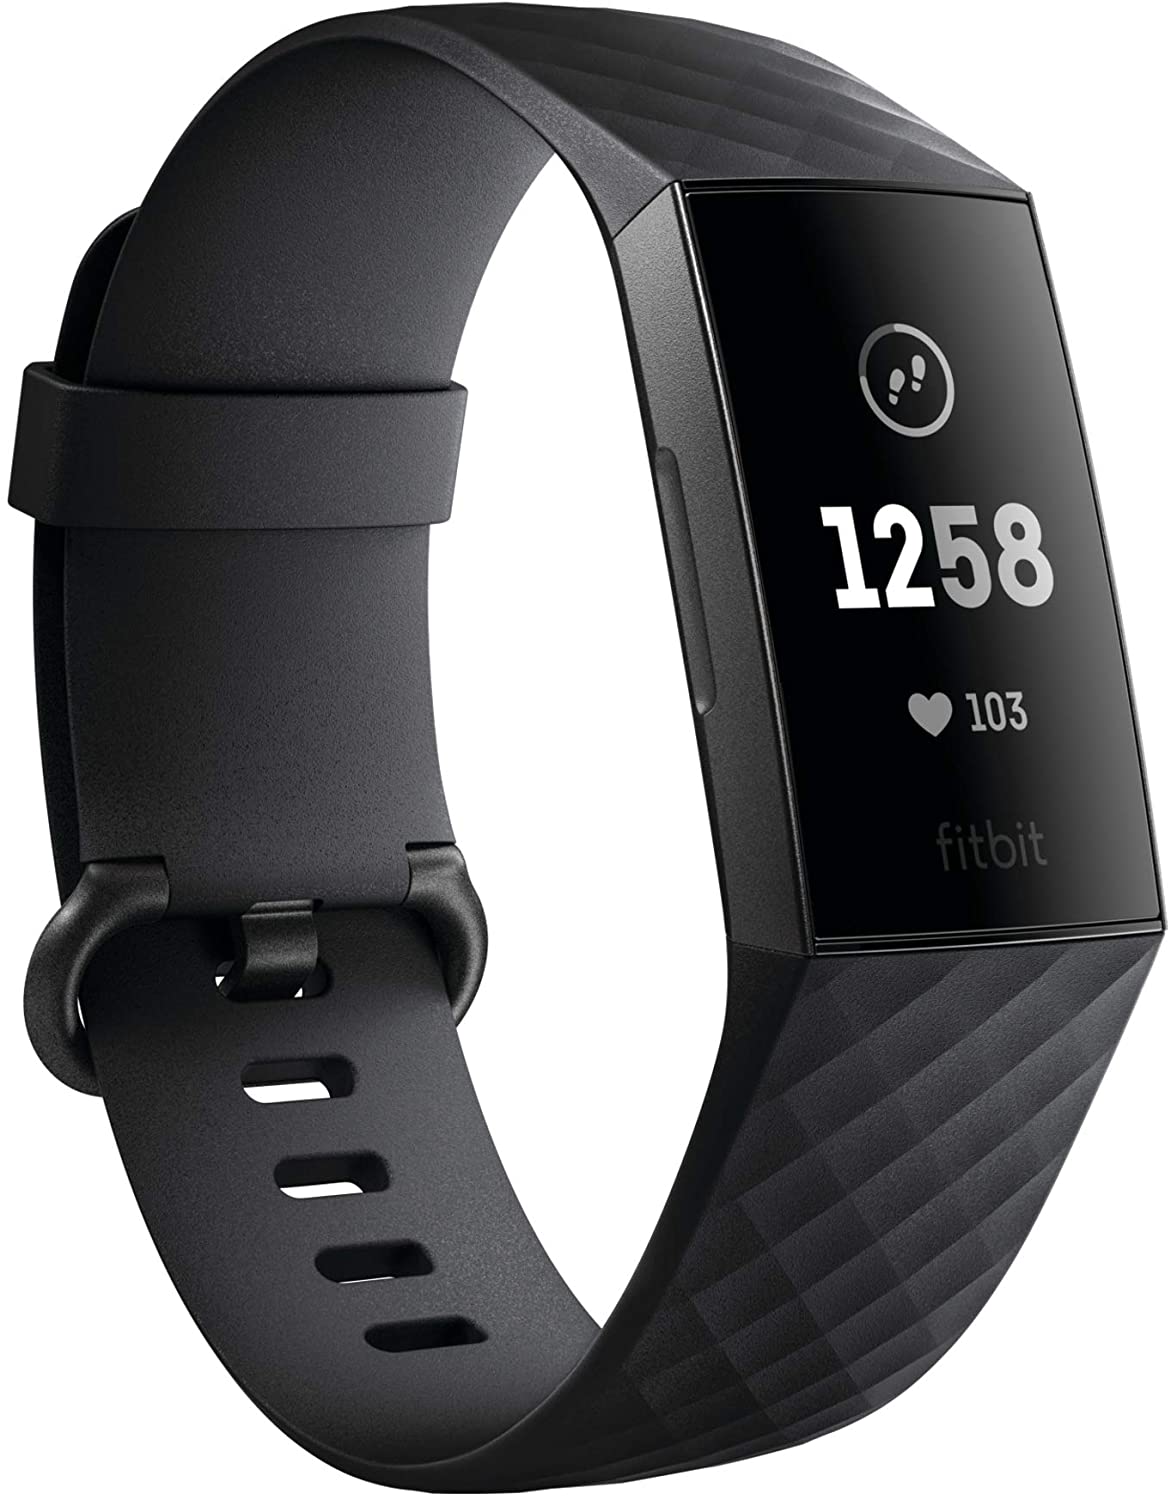 Fitness How Much Fitbit Tracker Cost Does A